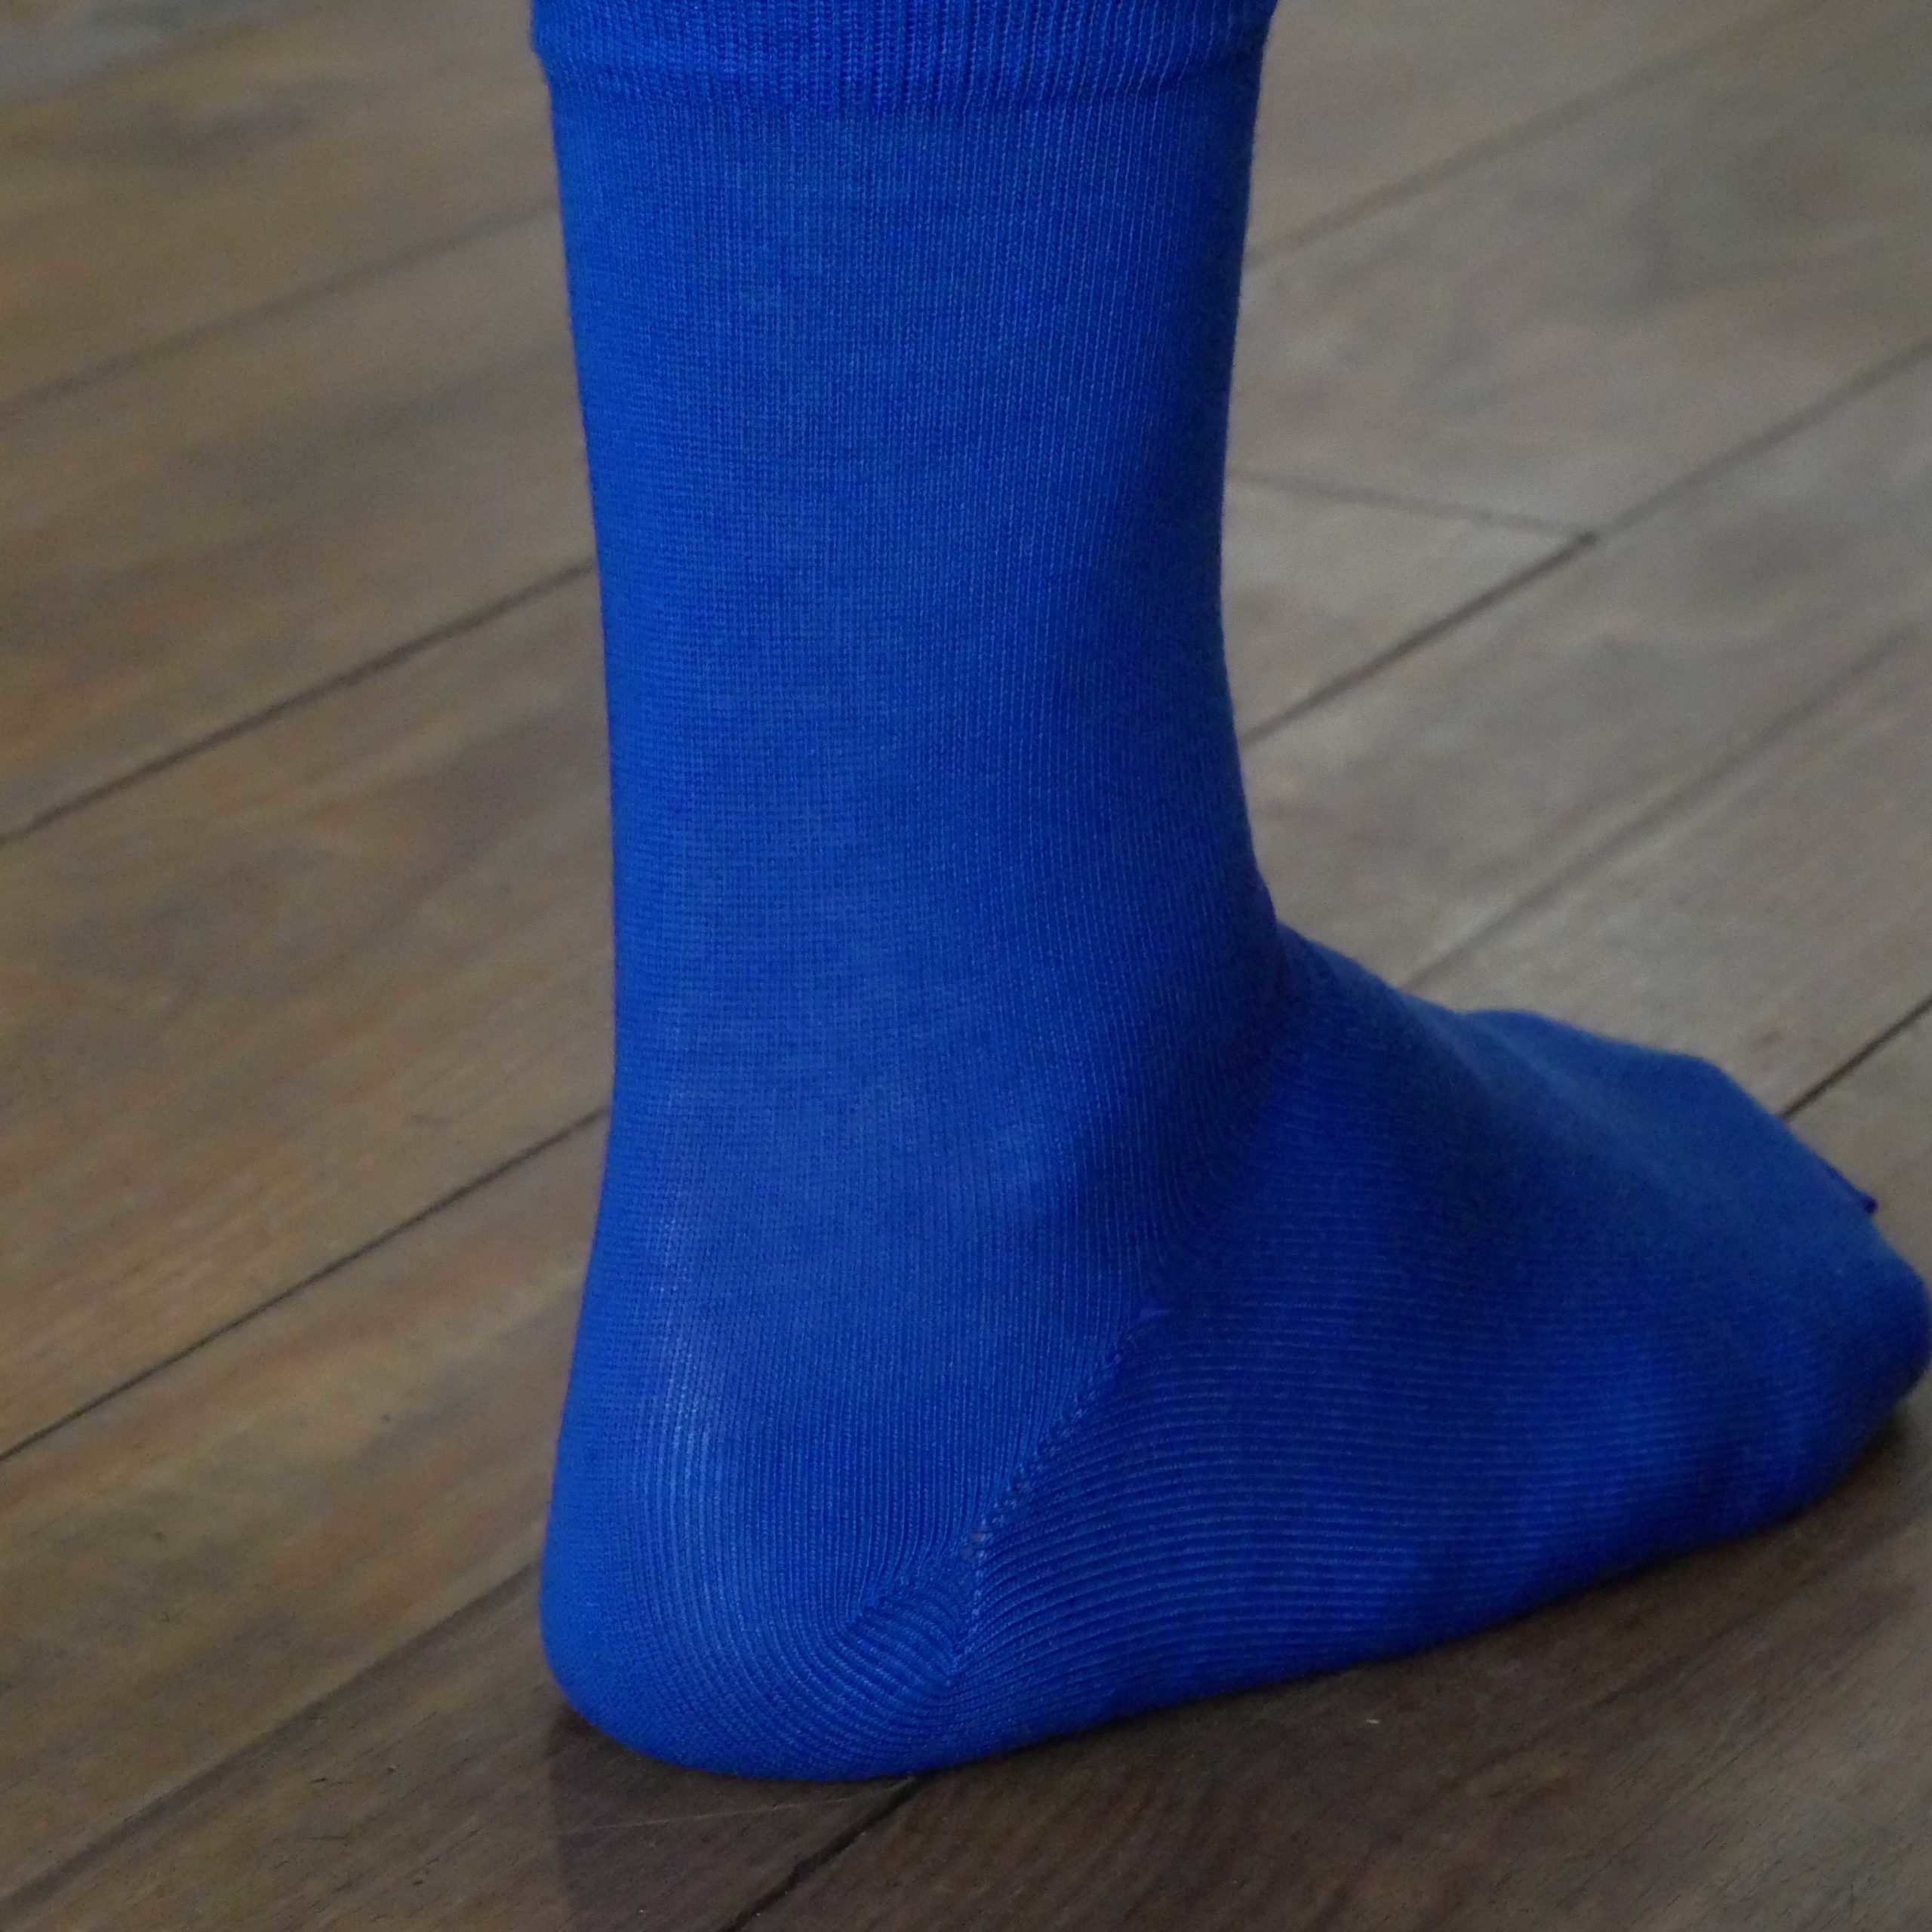 Chaussettes unies bleu marine coton bio - Made in France